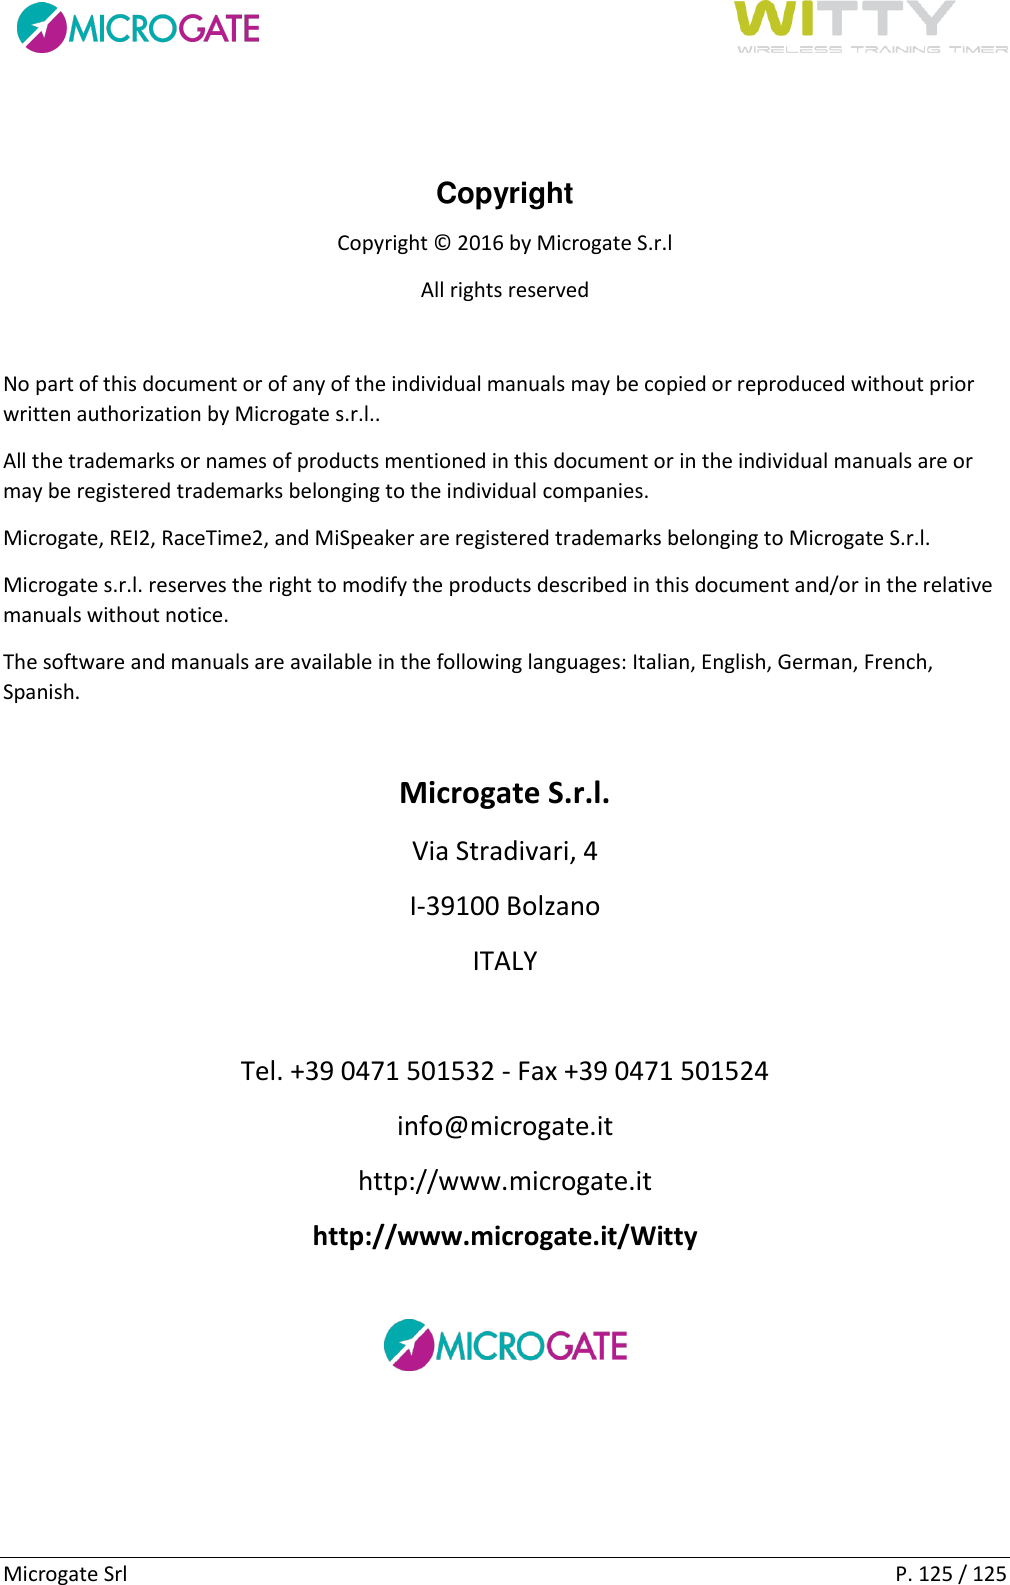      Microgate Srl    P. 125 / 125  Copyright Copyright © 2016 by Microgate S.r.l All rights reserved  No part of this document or of any of the individual manuals may be copied or reproduced without prior written authorization by Microgate s.r.l.. All the trademarks or names of products mentioned in this document or in the individual manuals are or may be registered trademarks belonging to the individual companies. Microgate, REI2, RaceTime2, and MiSpeaker are registered trademarks belonging to Microgate S.r.l. Microgate s.r.l. reserves the right to modify the products described in this document and/or in the relative manuals without notice. The software and manuals are available in the following languages: Italian, English, German, French, Spanish.  Microgate S.r.l. Via Stradivari, 4 I-39100 Bolzano ITALY  Tel. +39 0471 501532 - Fax +39 0471 501524 info@microgate.it http://www.microgate.it http://www.microgate.it/Witty   